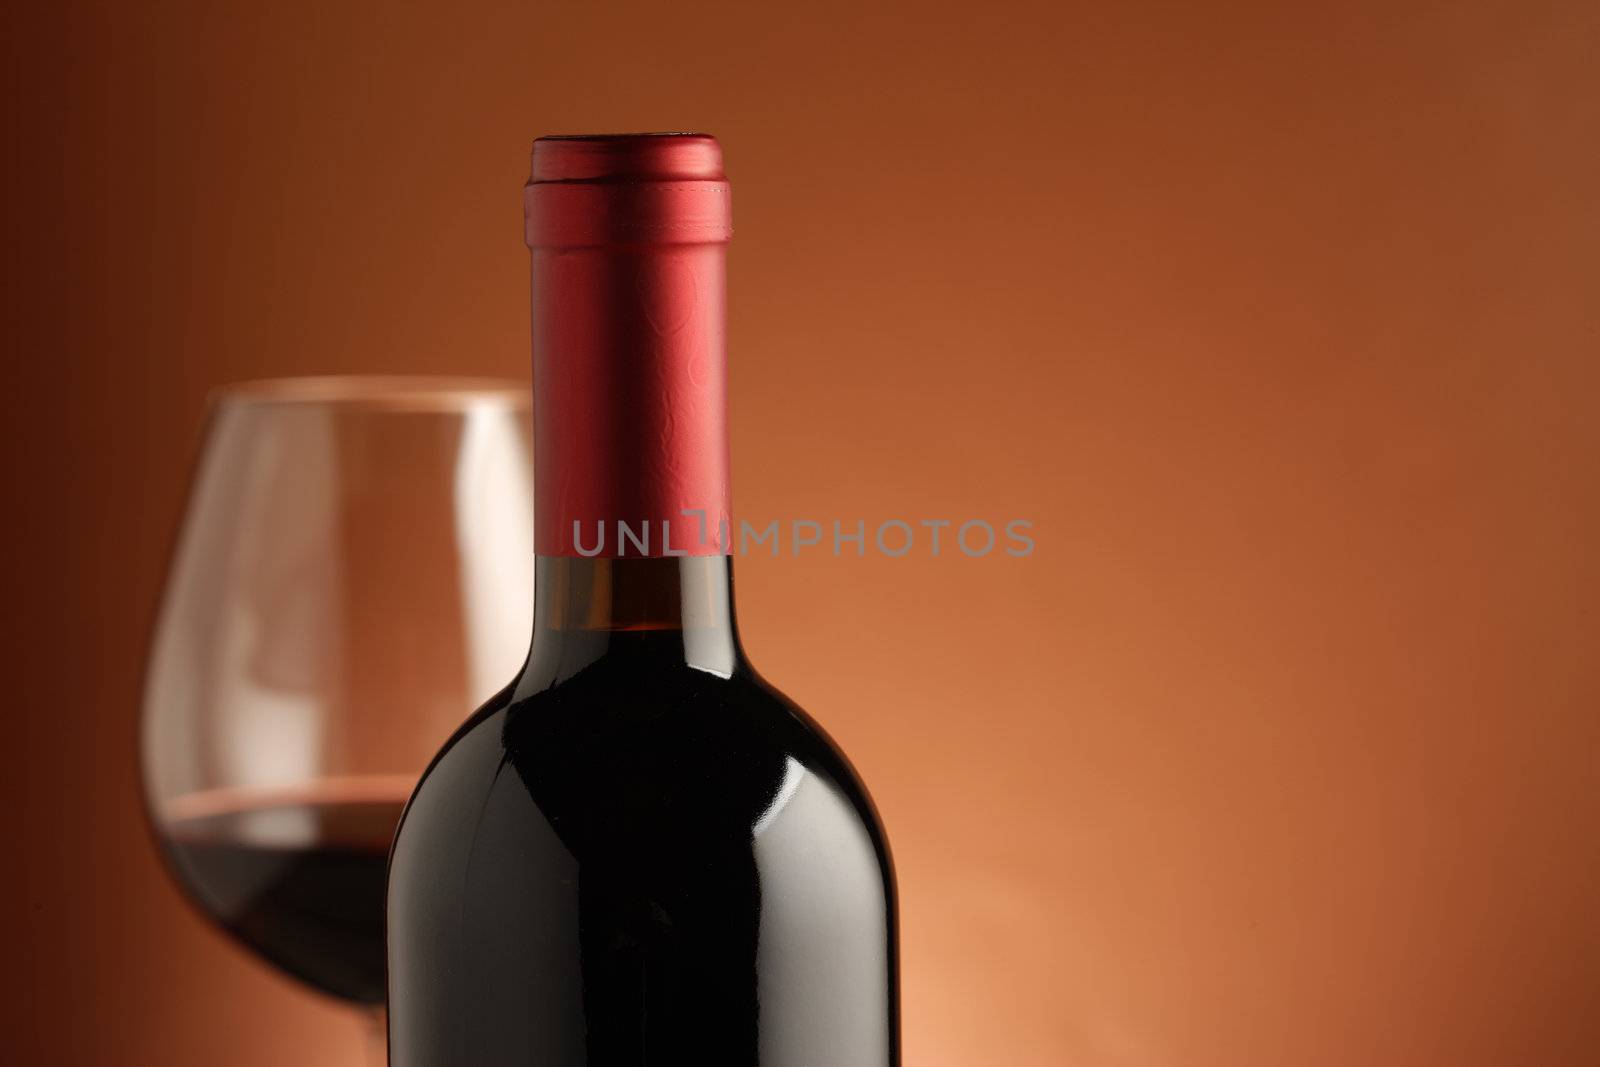 red wine bottle and a wine glass at background.(Shallow DOF)